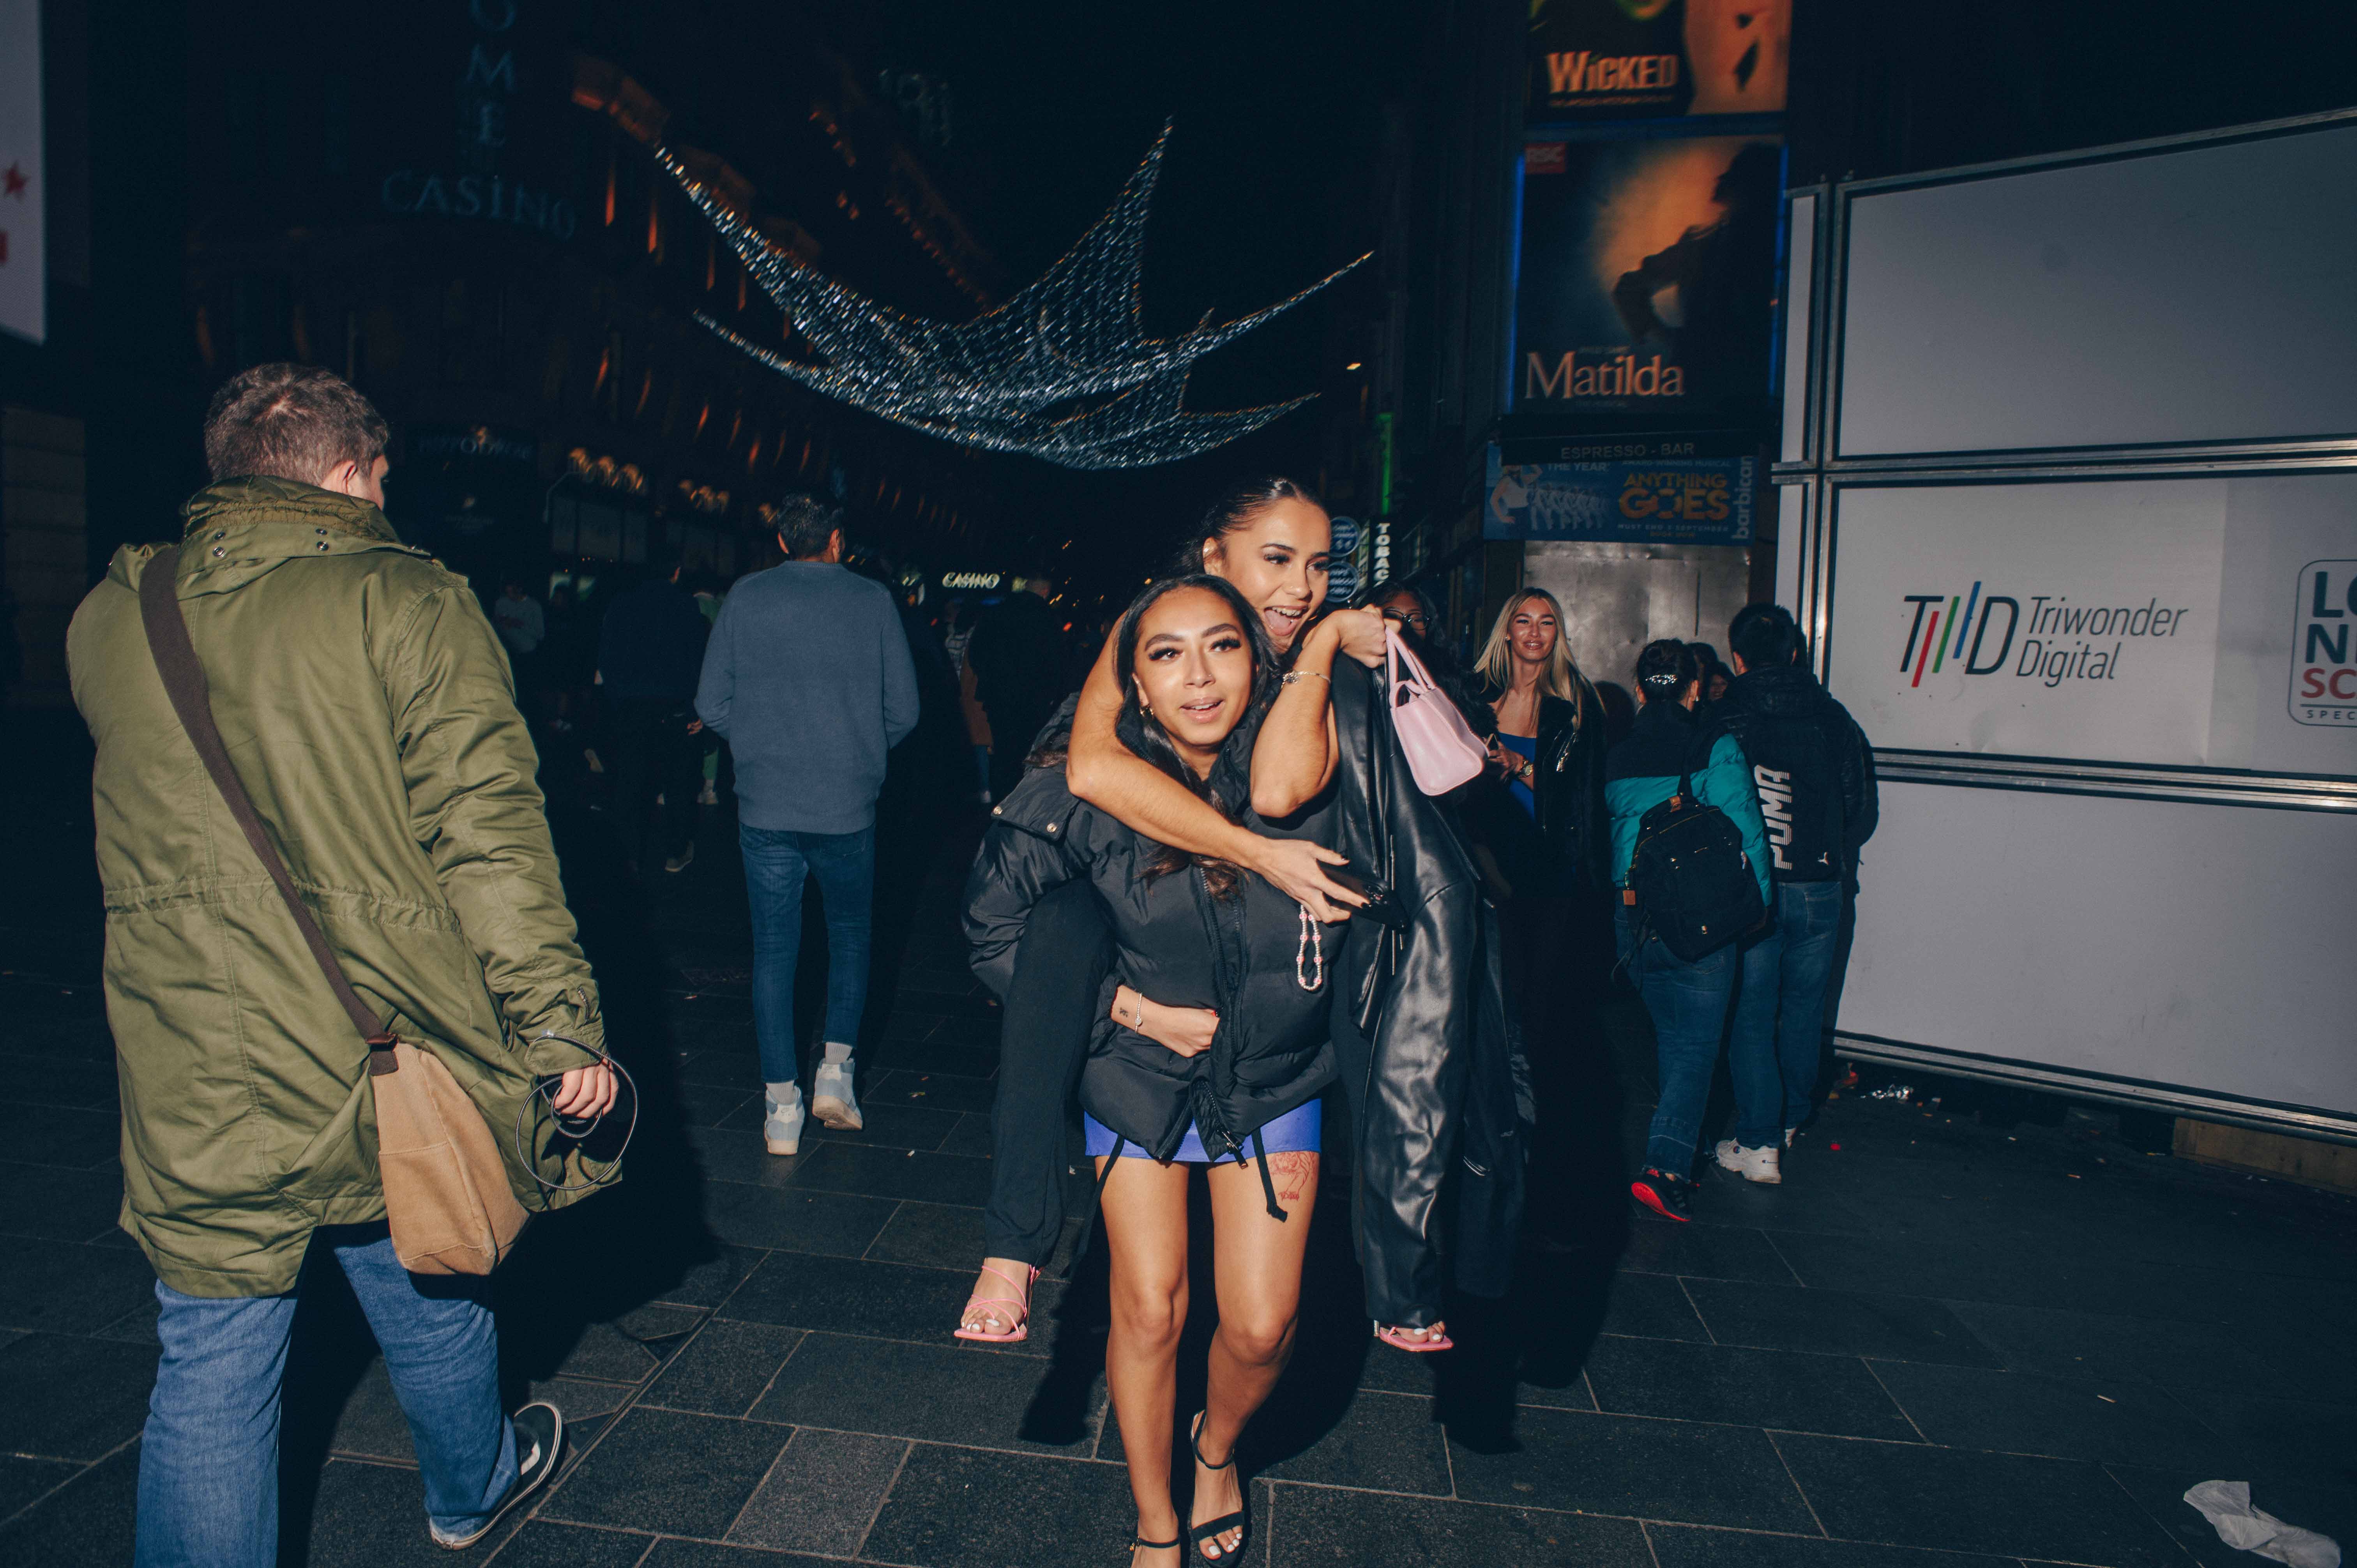 A woman gives another woman a piggyback ride on a busy street.